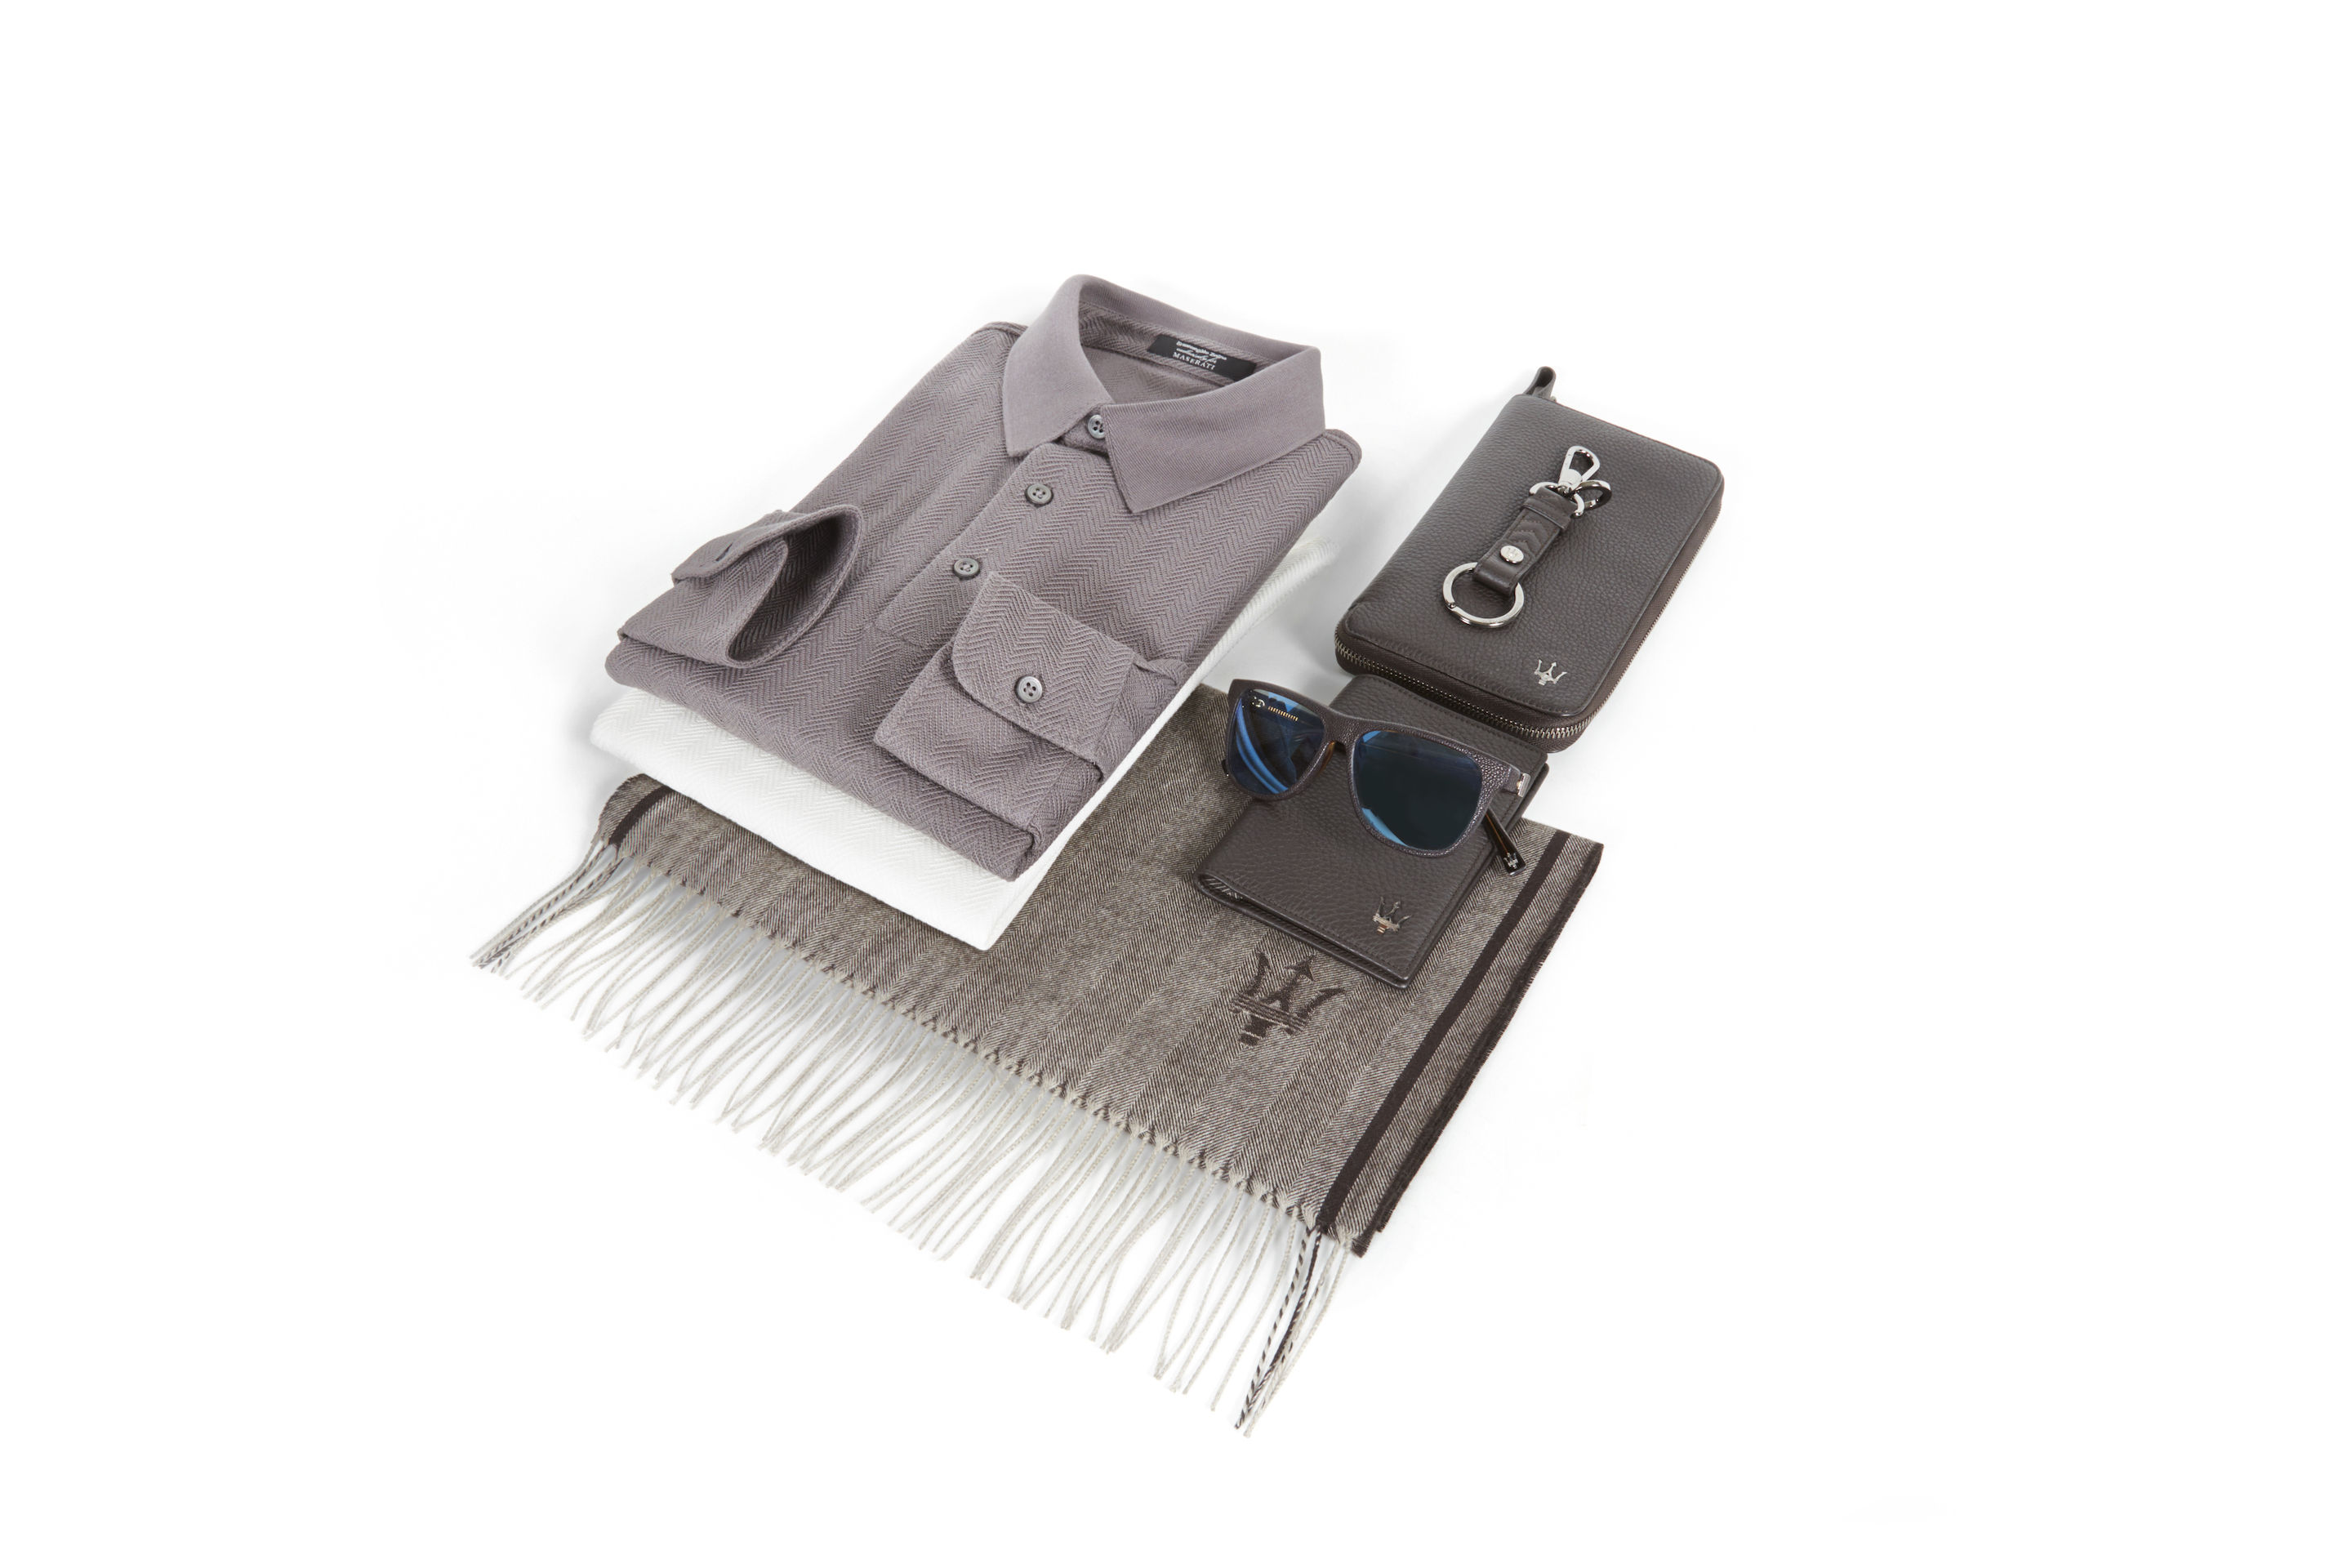 5 must-haves from the Ermenegildo Zegna x Maserati collection